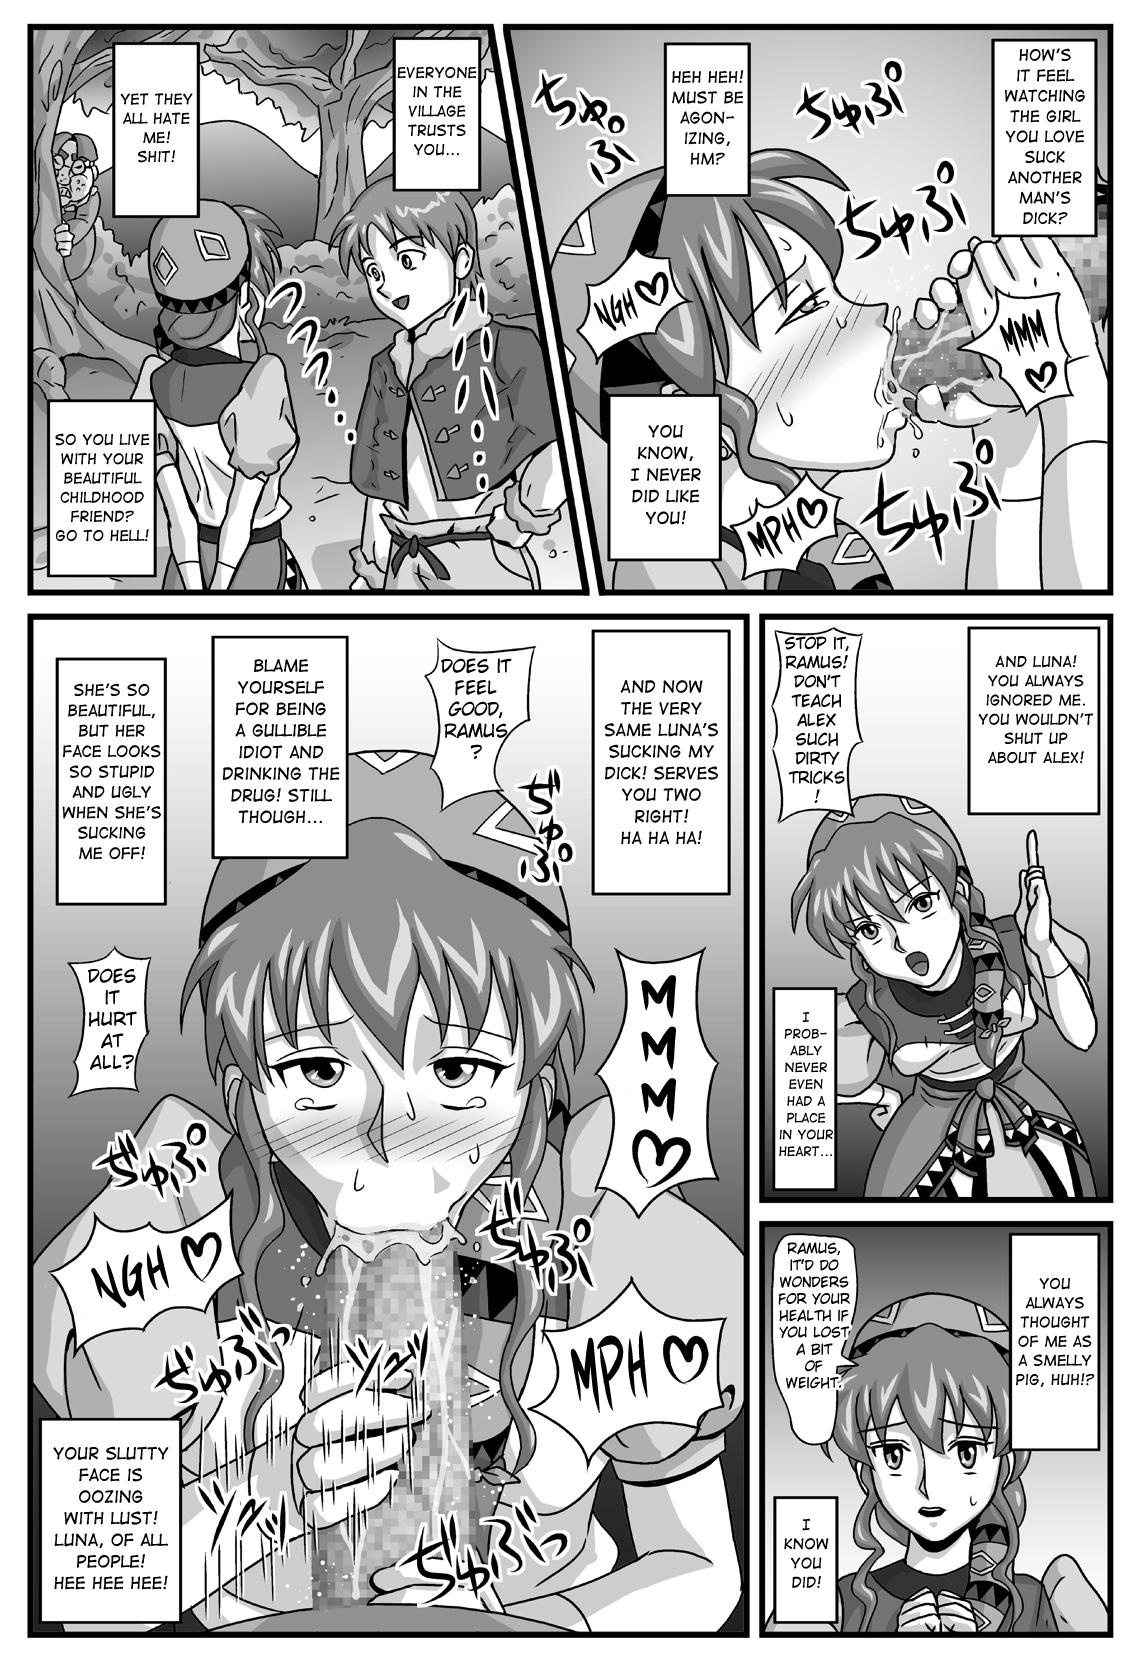 Fuck The Cumdumpster Princess of Burg 01 - Lunar silver star story Freckles - Page 9